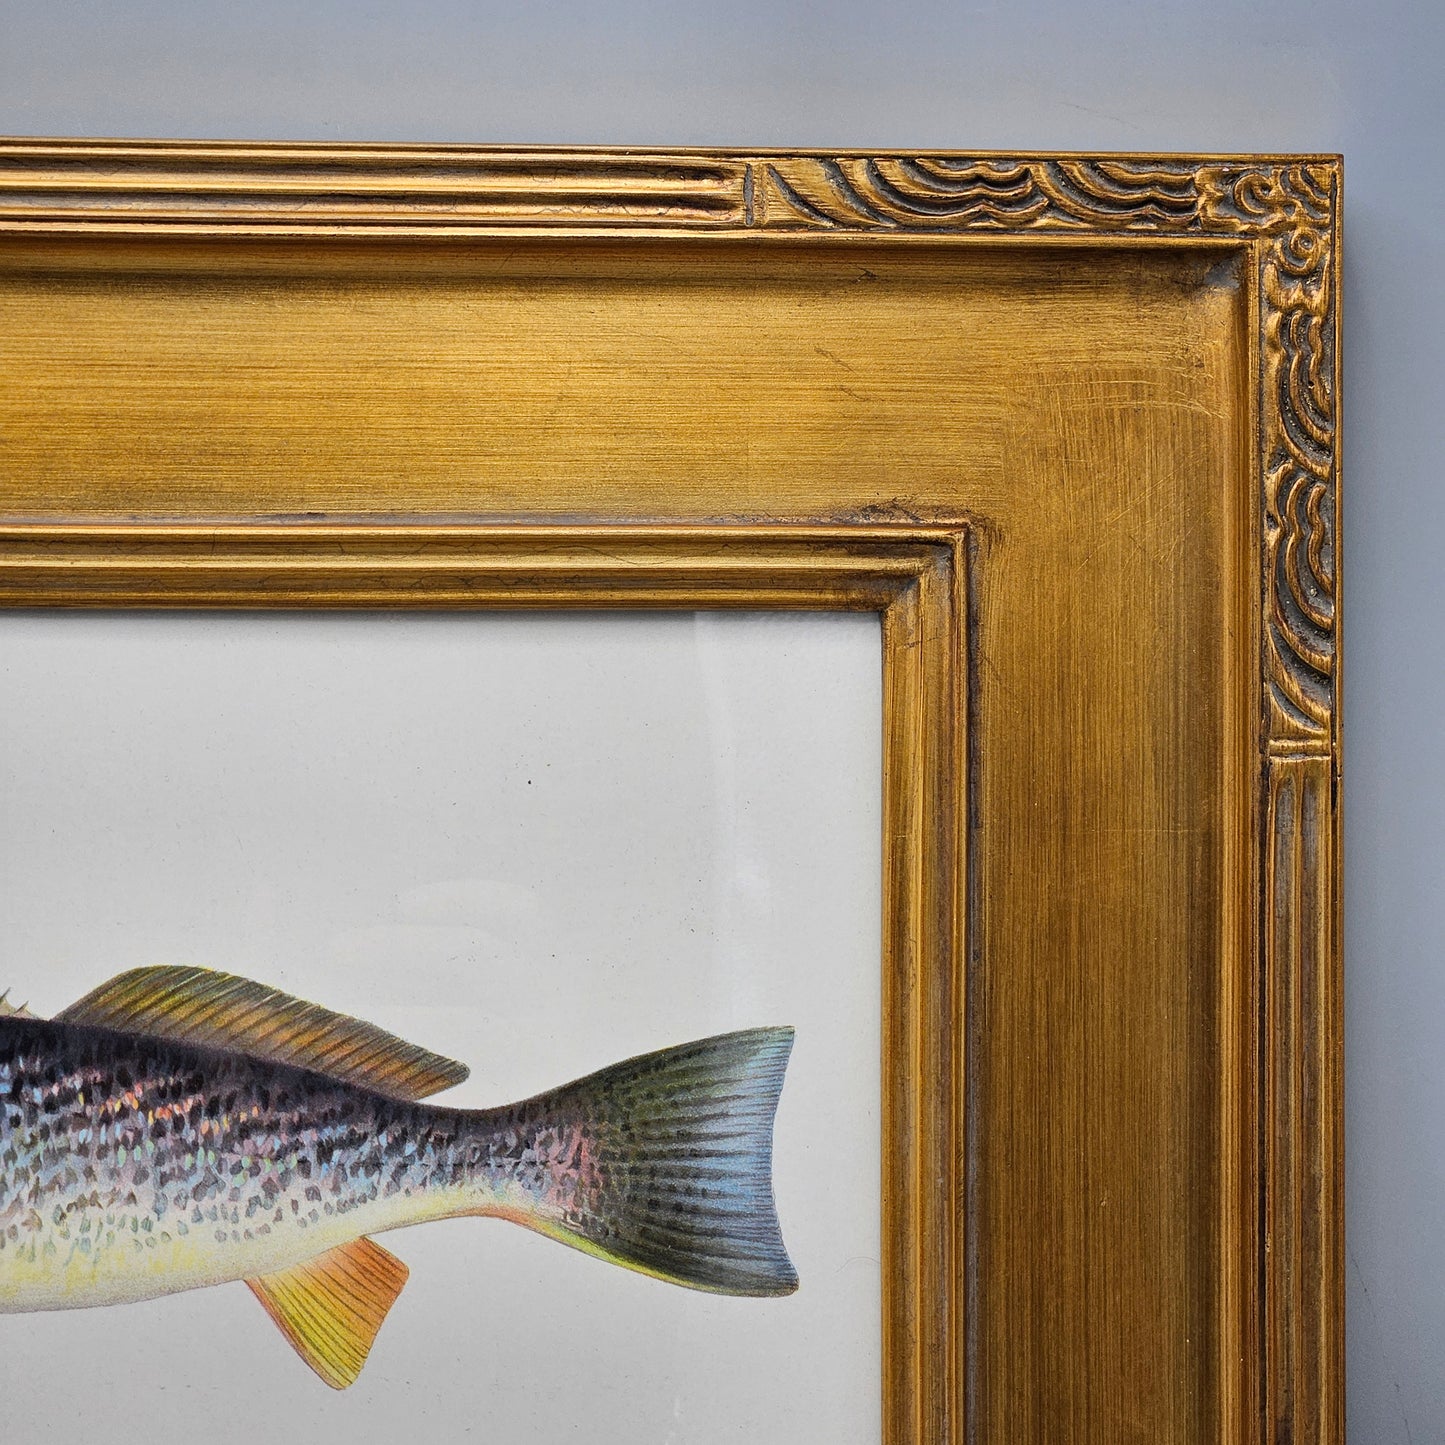 Antique Weak-Fish or Squeteague Framed Fish Hand Colored Lithograph